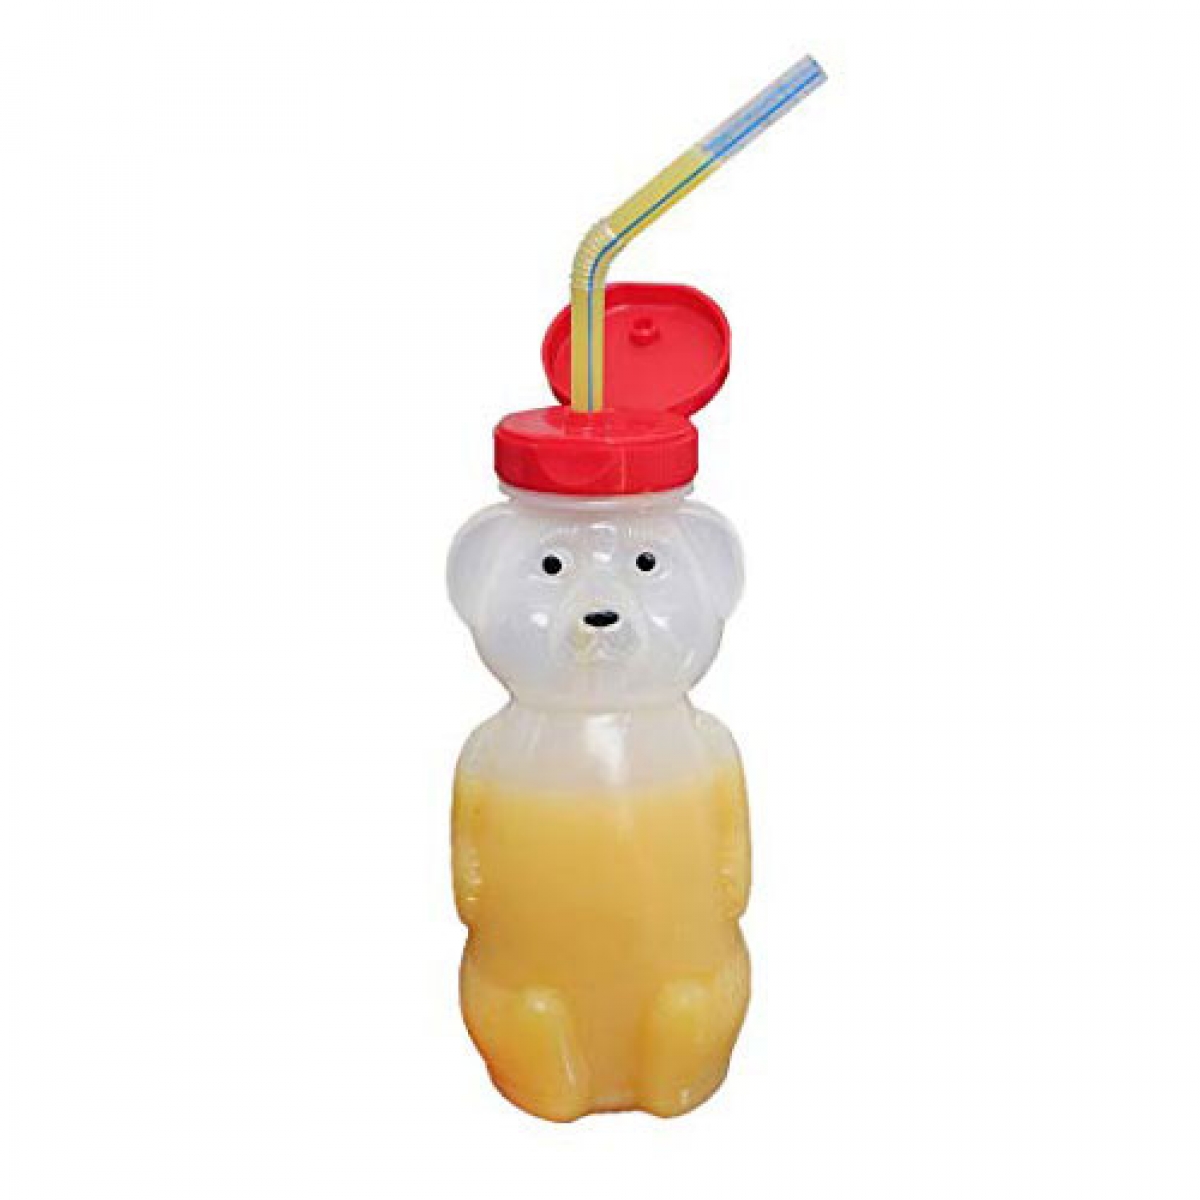 https://www.autism-products.com/wp-content/uploads/Special-Needs-Bottle-Bear-Straw-Drinking-Teaching-Cup-1200x1200.jpg